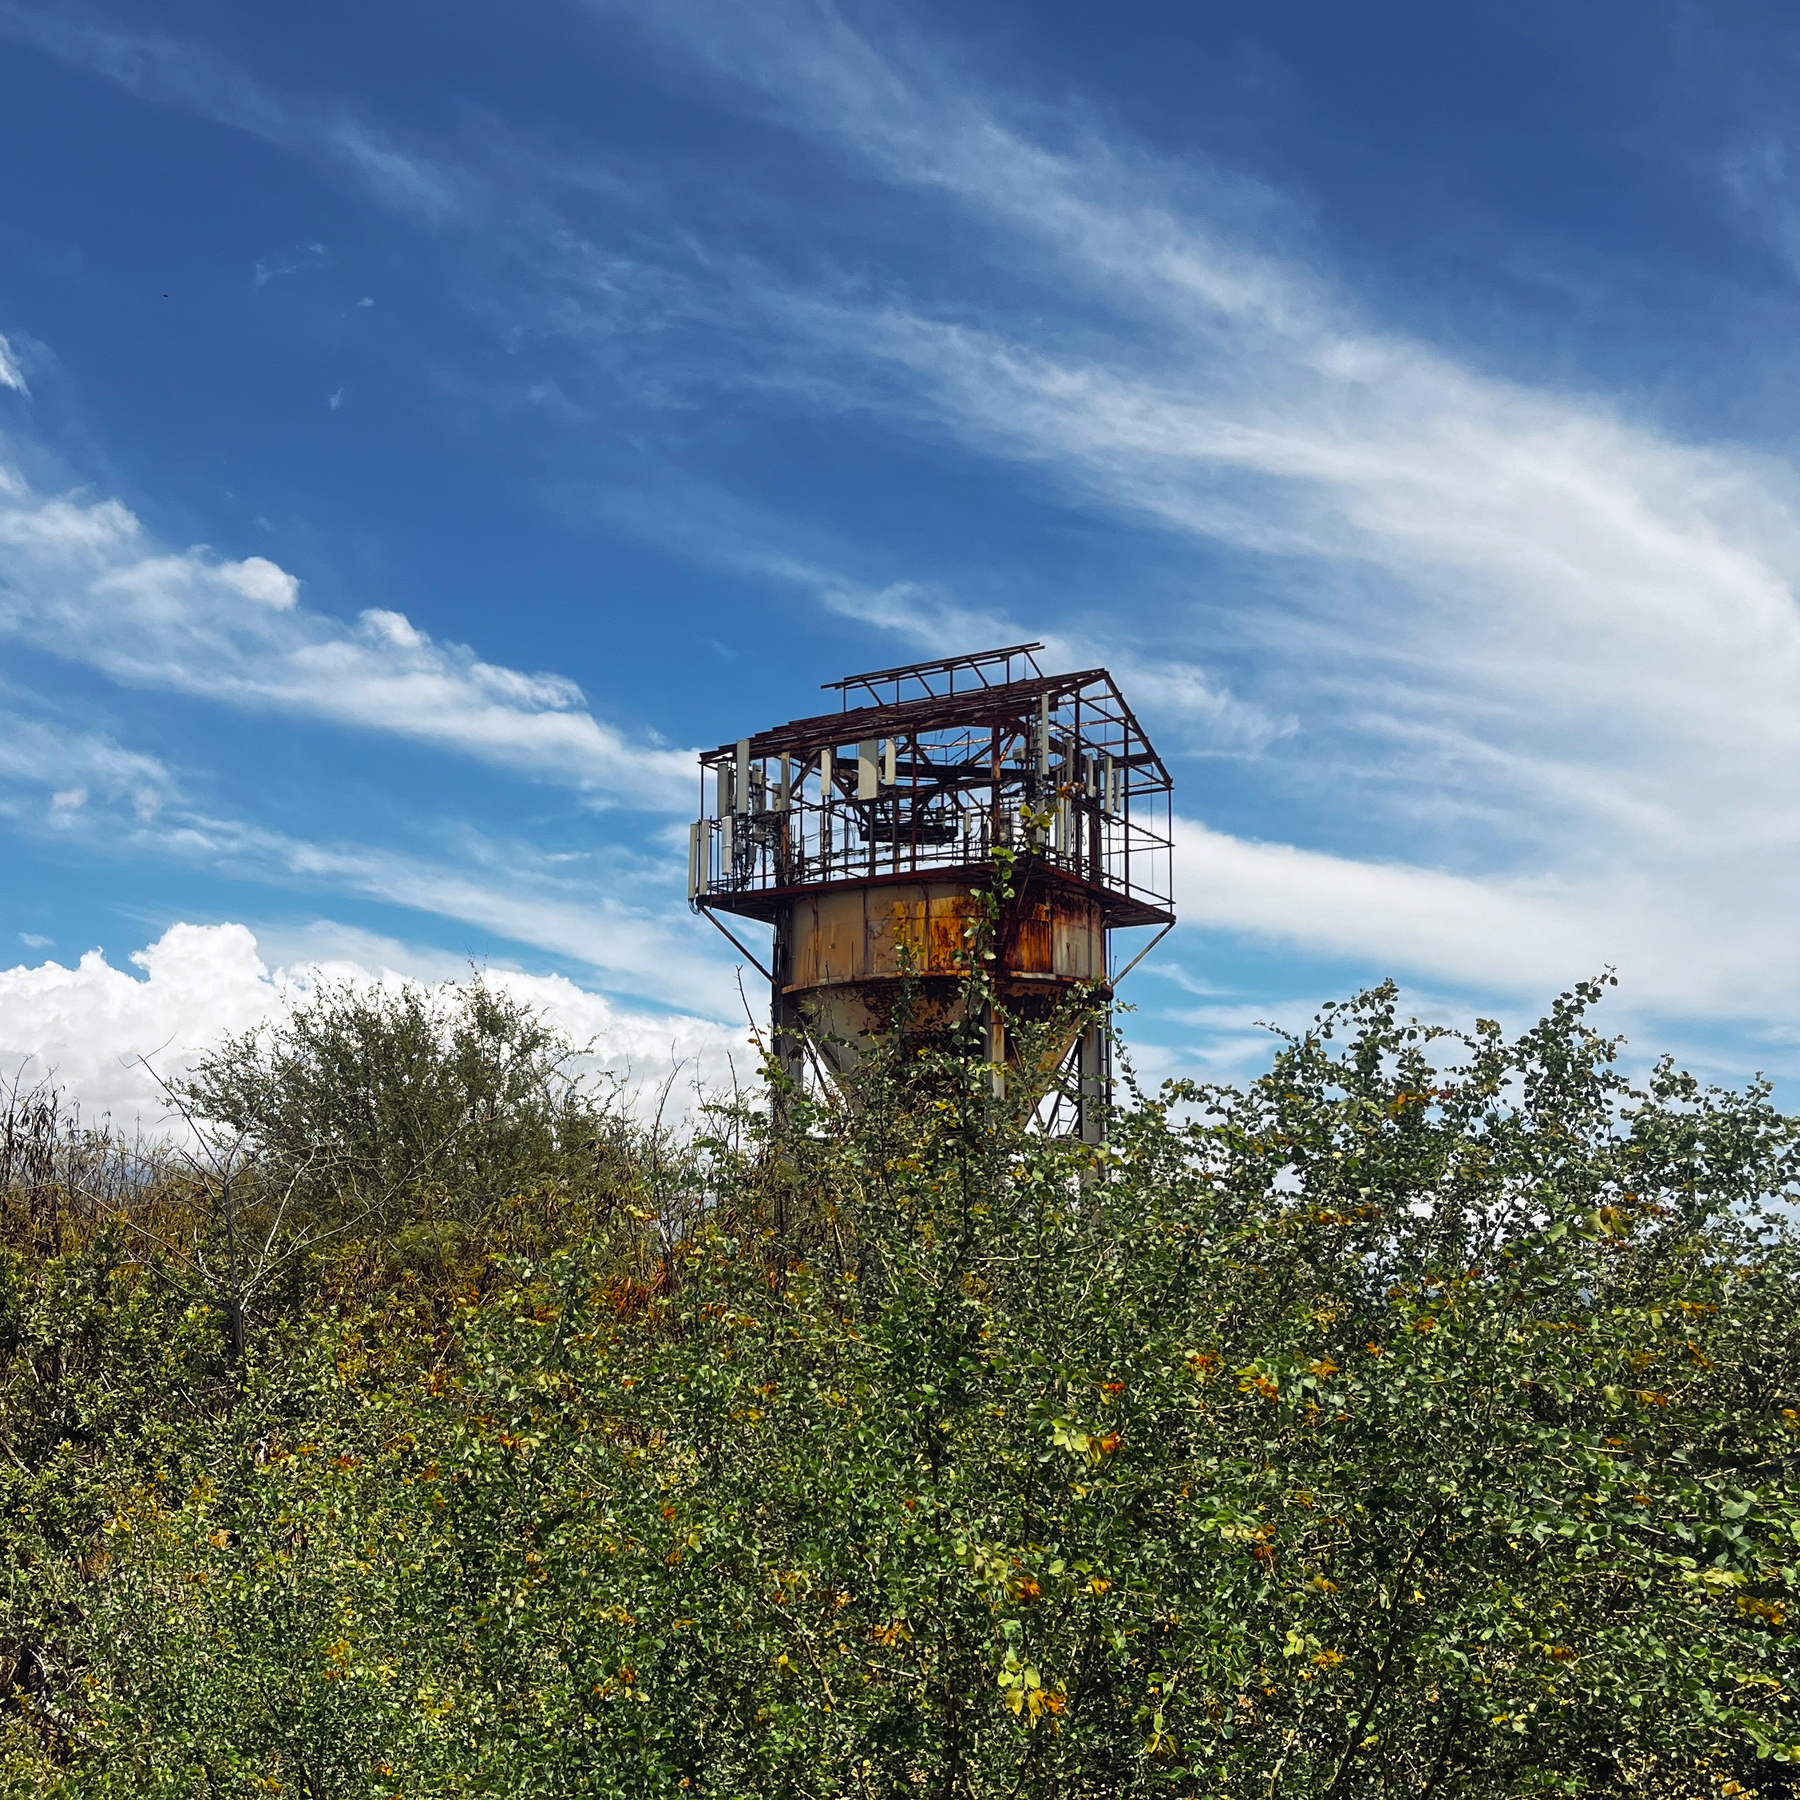 An aged, rusty watchtower stands among dense vegetation under a partly cloudy sky.